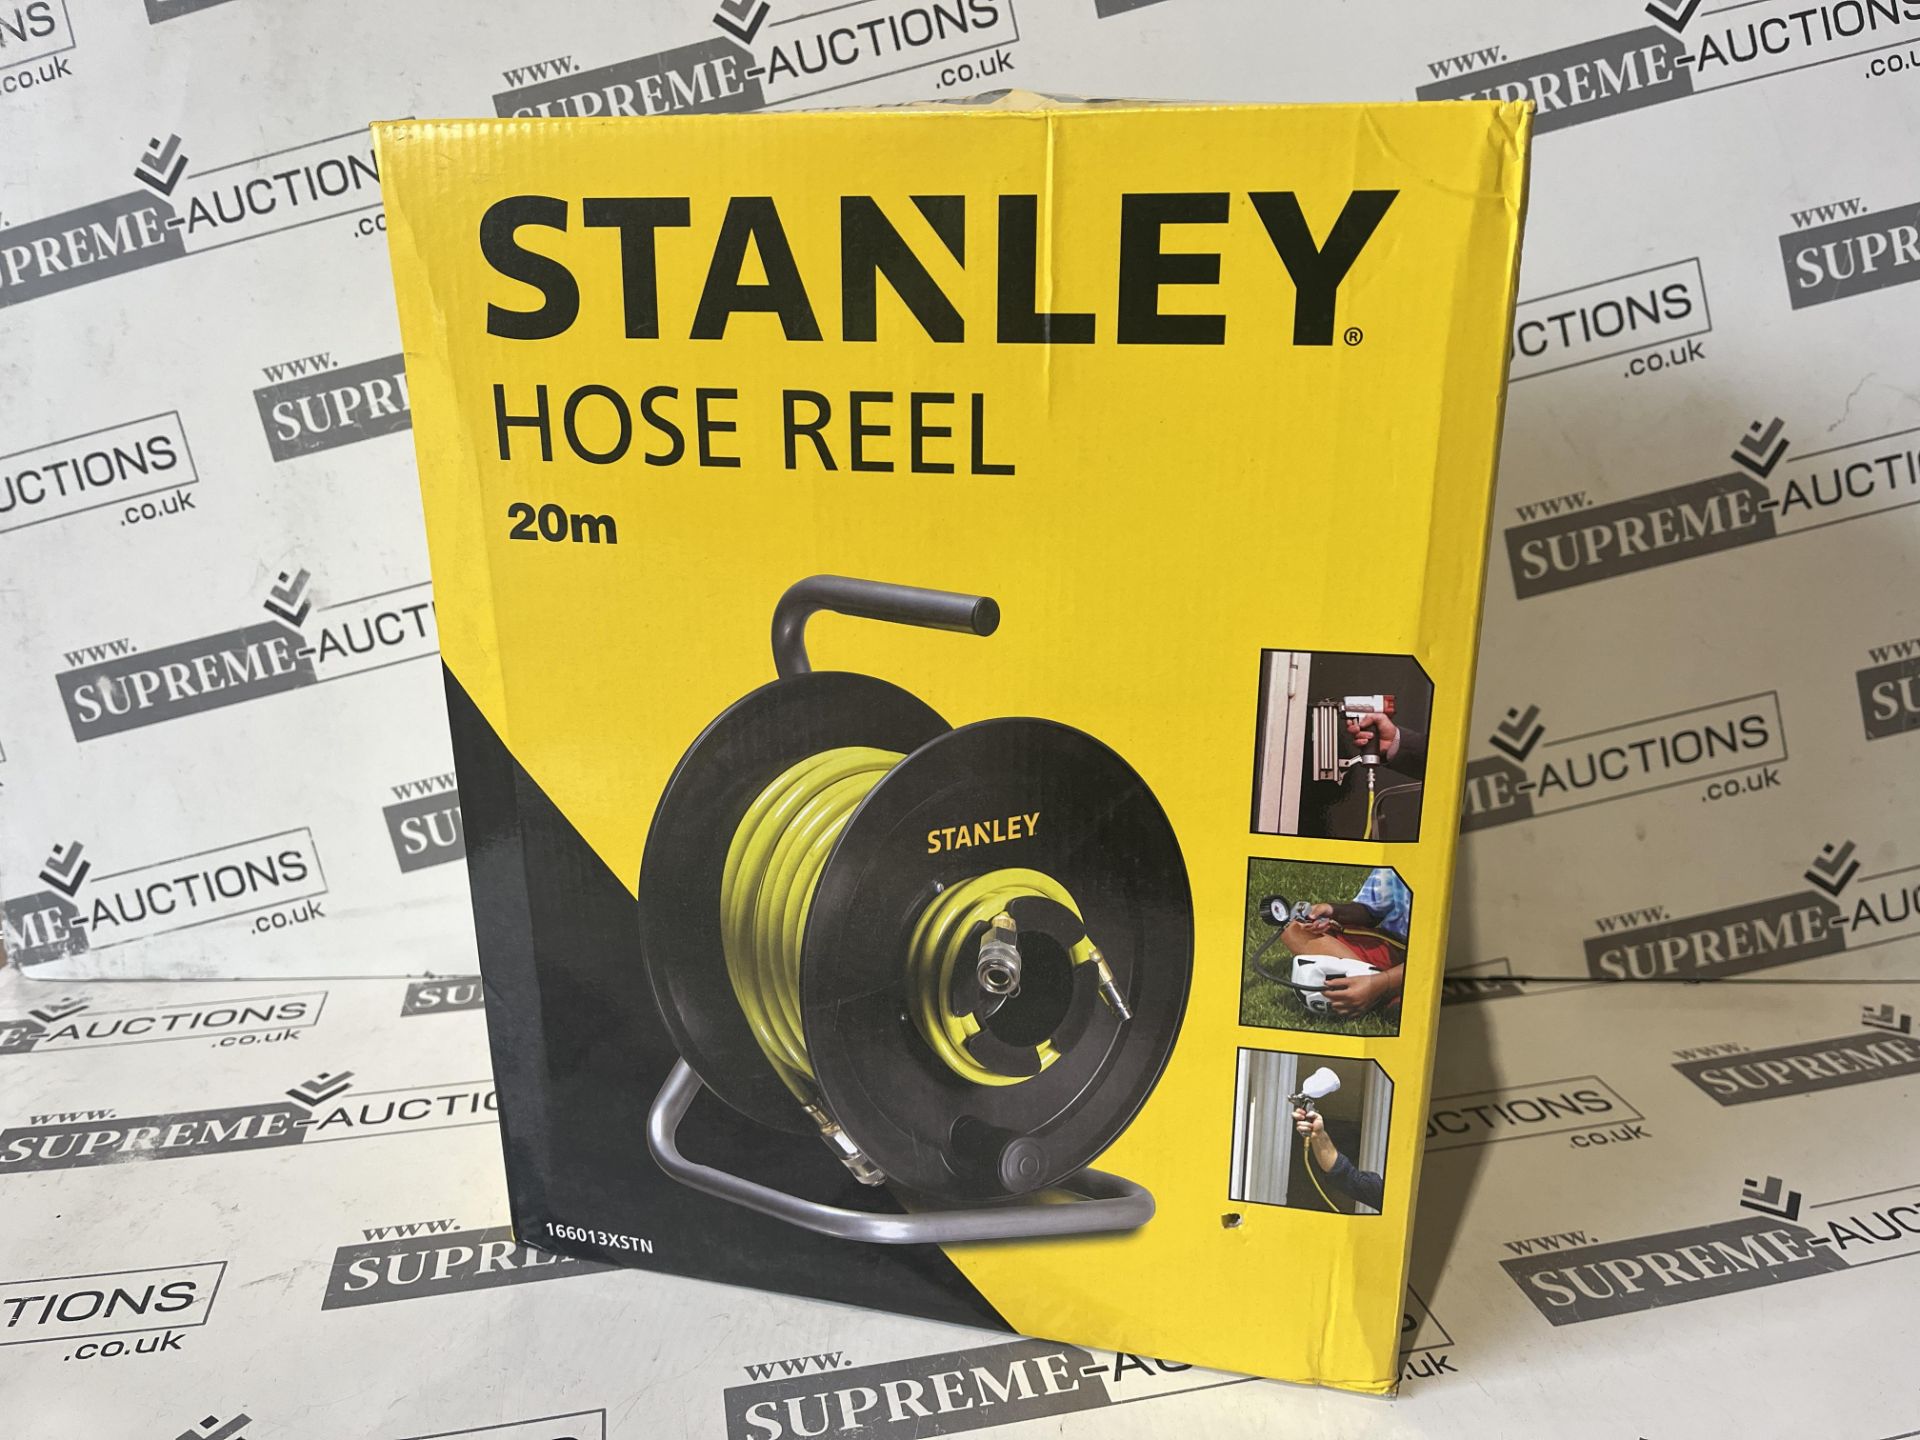 2 X Brand New Stanley Compressed Air Hose Reel 20 meters, With pneumatic quick coupling and - Image 6 of 6